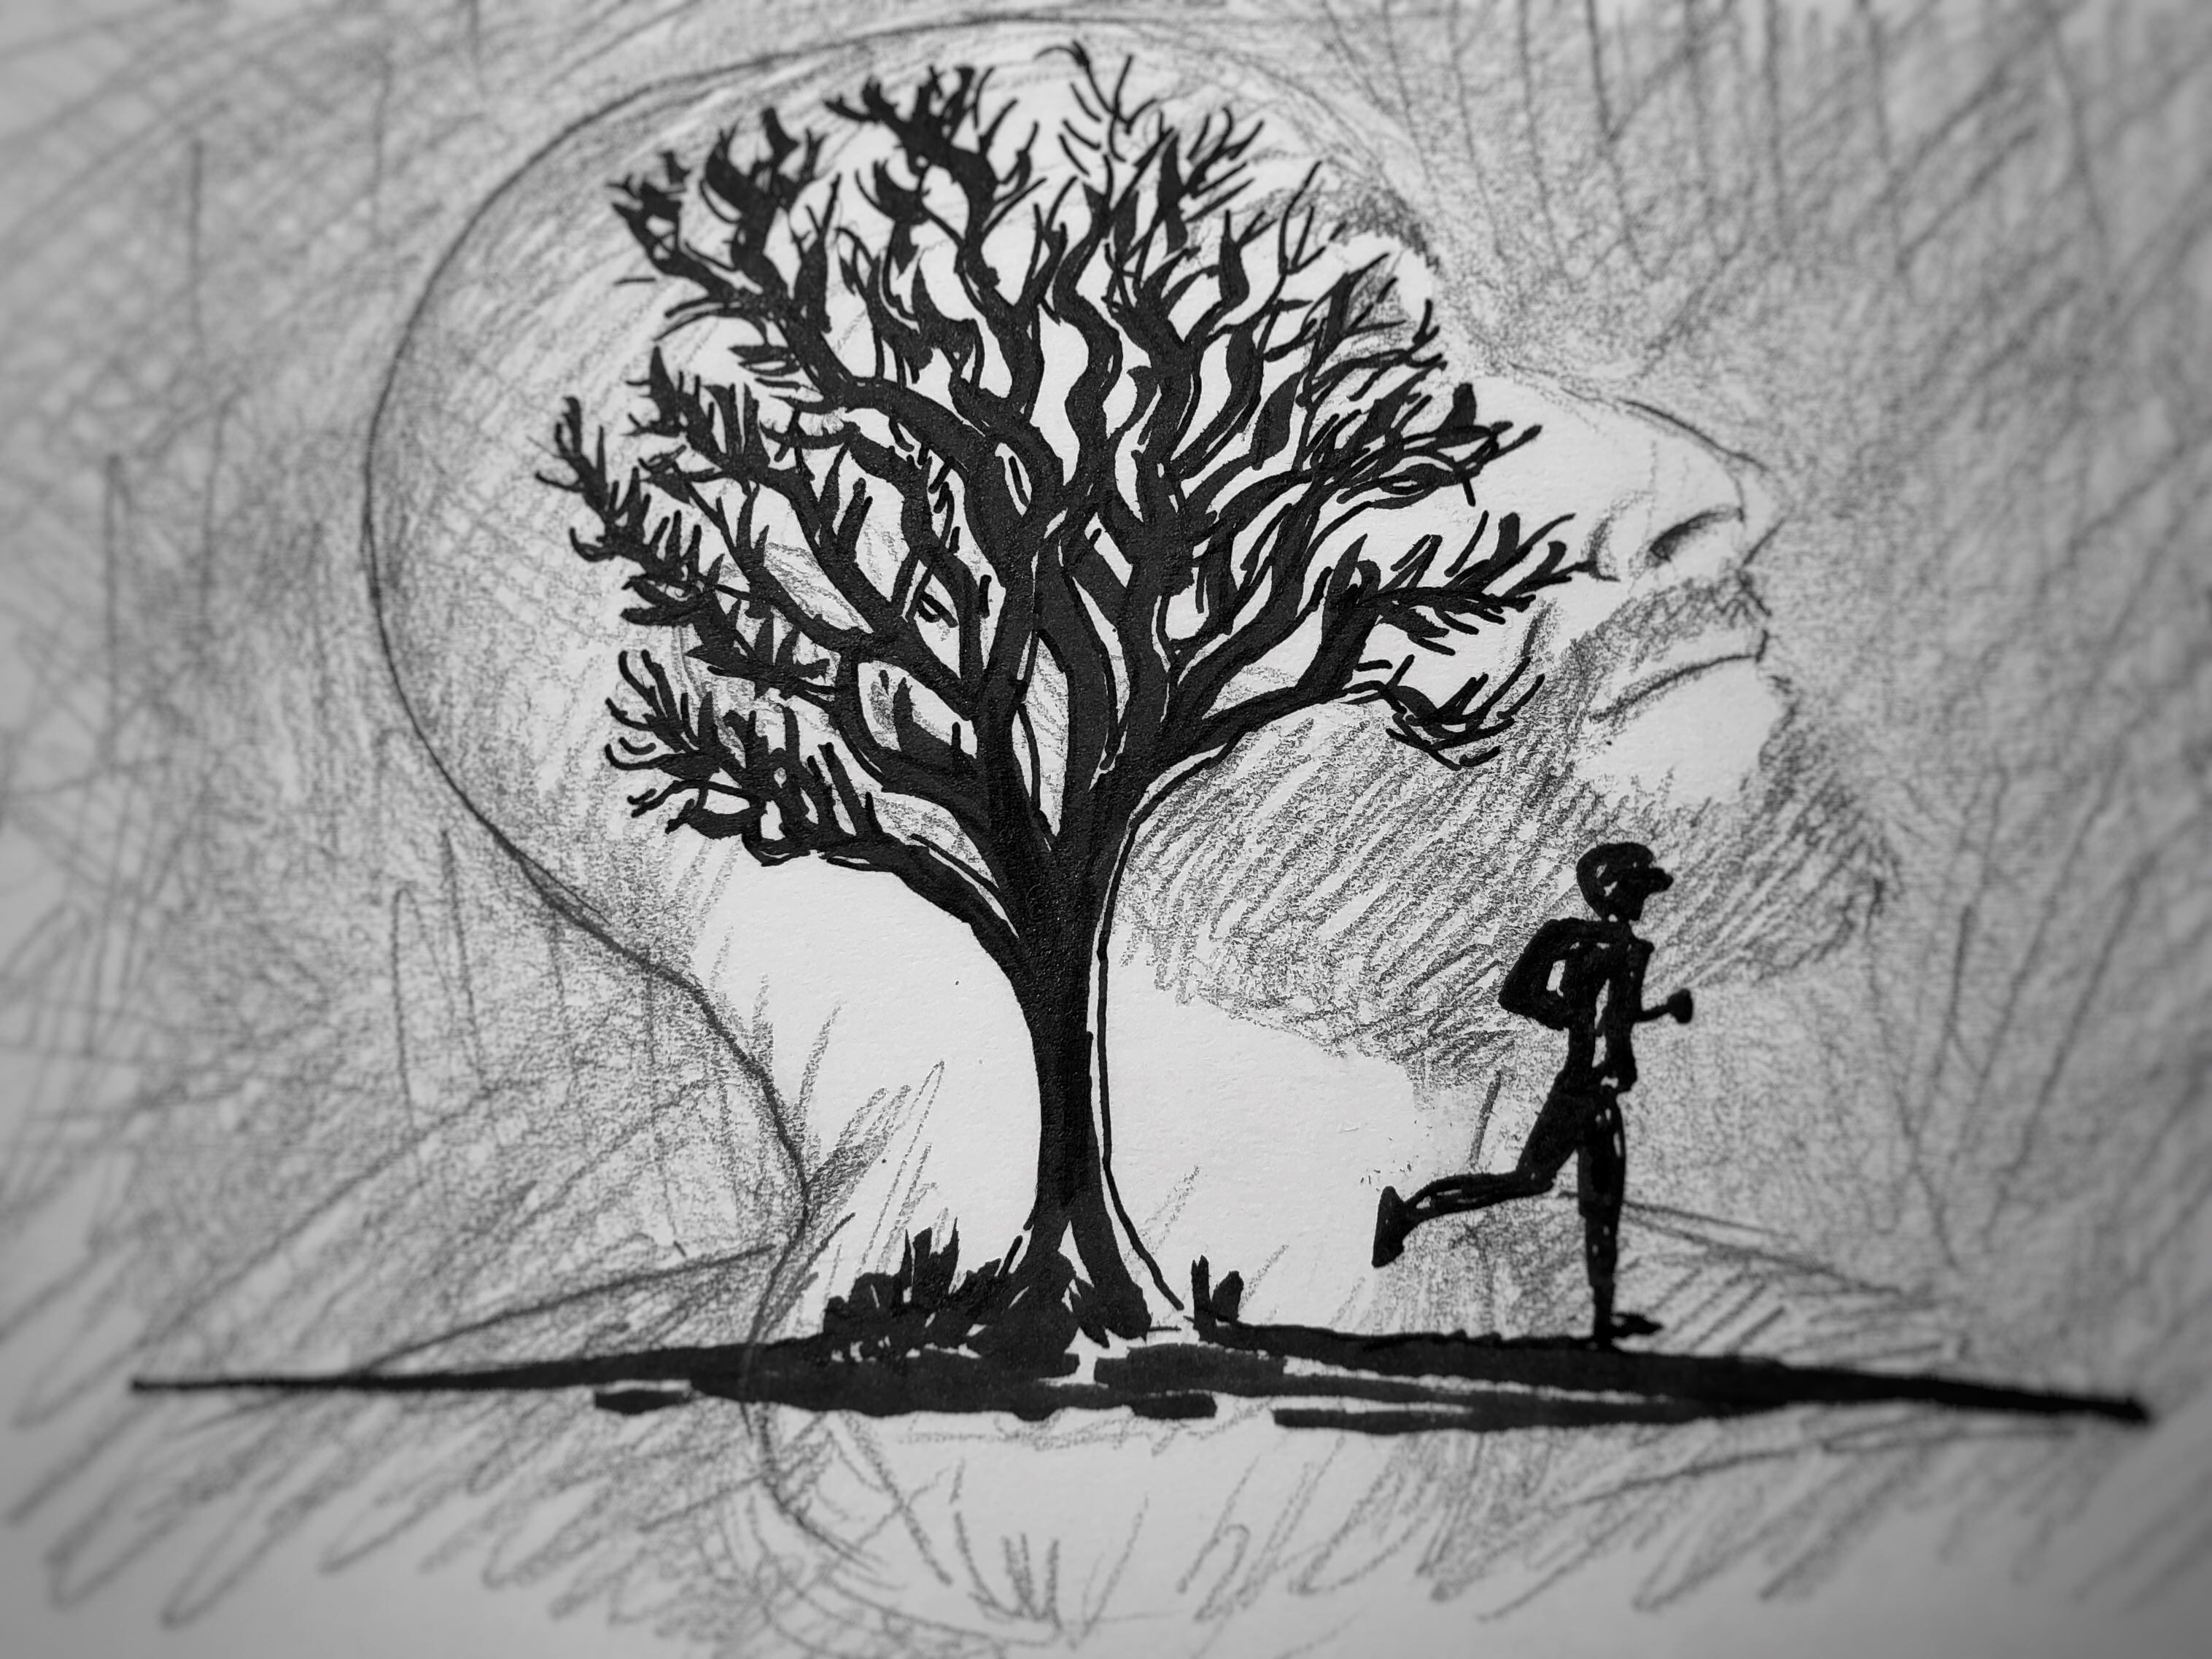 Pencil and pen drawing of a silhouette of a runner passing a tree.